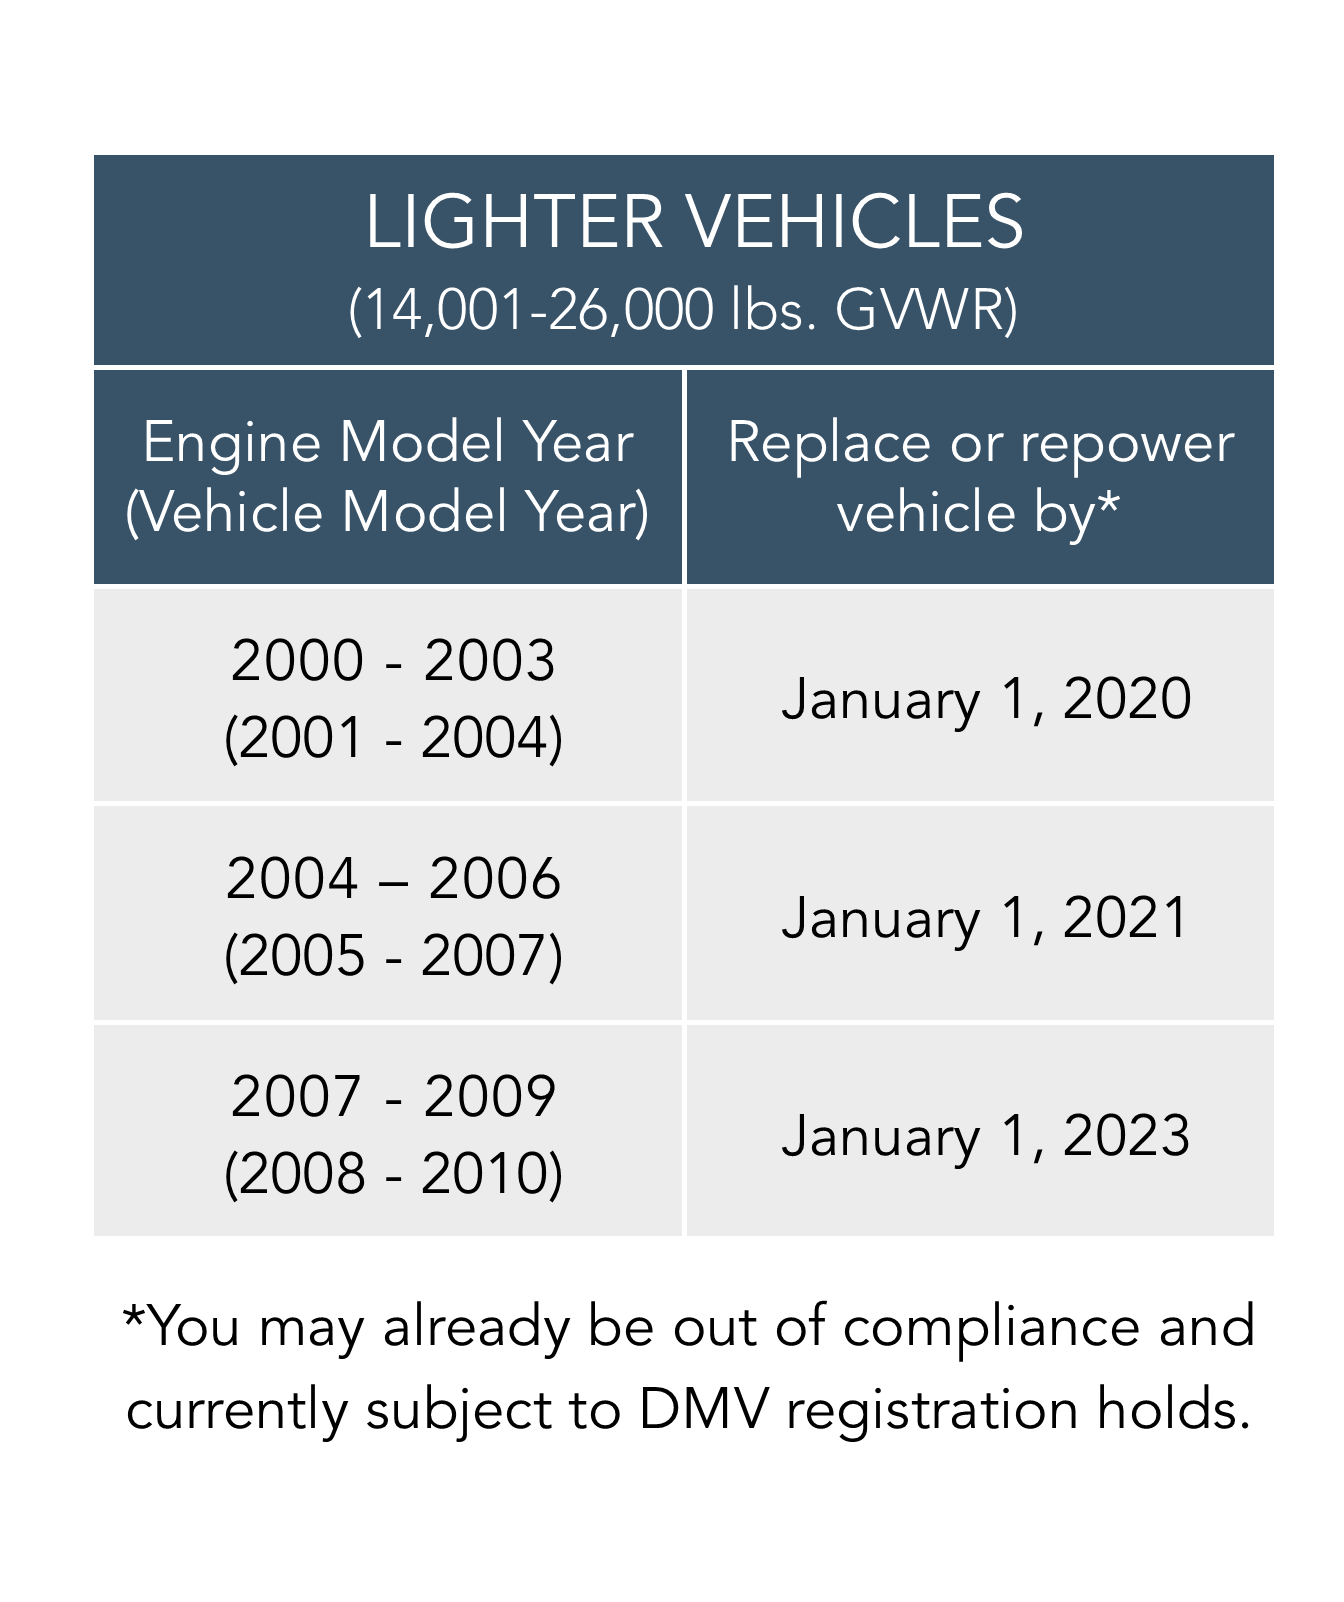 Lighter vehicles between 14,001 and 26,000lbs GVWR: 1995 and older model year engines need to be replaced or repowered by 1/1/15. 1996 model year engines need to be replaced or repowered by 1/1/16. 1997 and older model year engines need to be replaced or repowered by 1/1/17. 1999 and older engines need to be replaced or repowered by 1/1/19. 2000-2003 model year engines need to be replaced or repowered by 1/1/20. 2004-2006 model year engines need to be replaced or repowered by 1/1/21. 2007-2009 model year engines need to be replaced by 1/1/23.